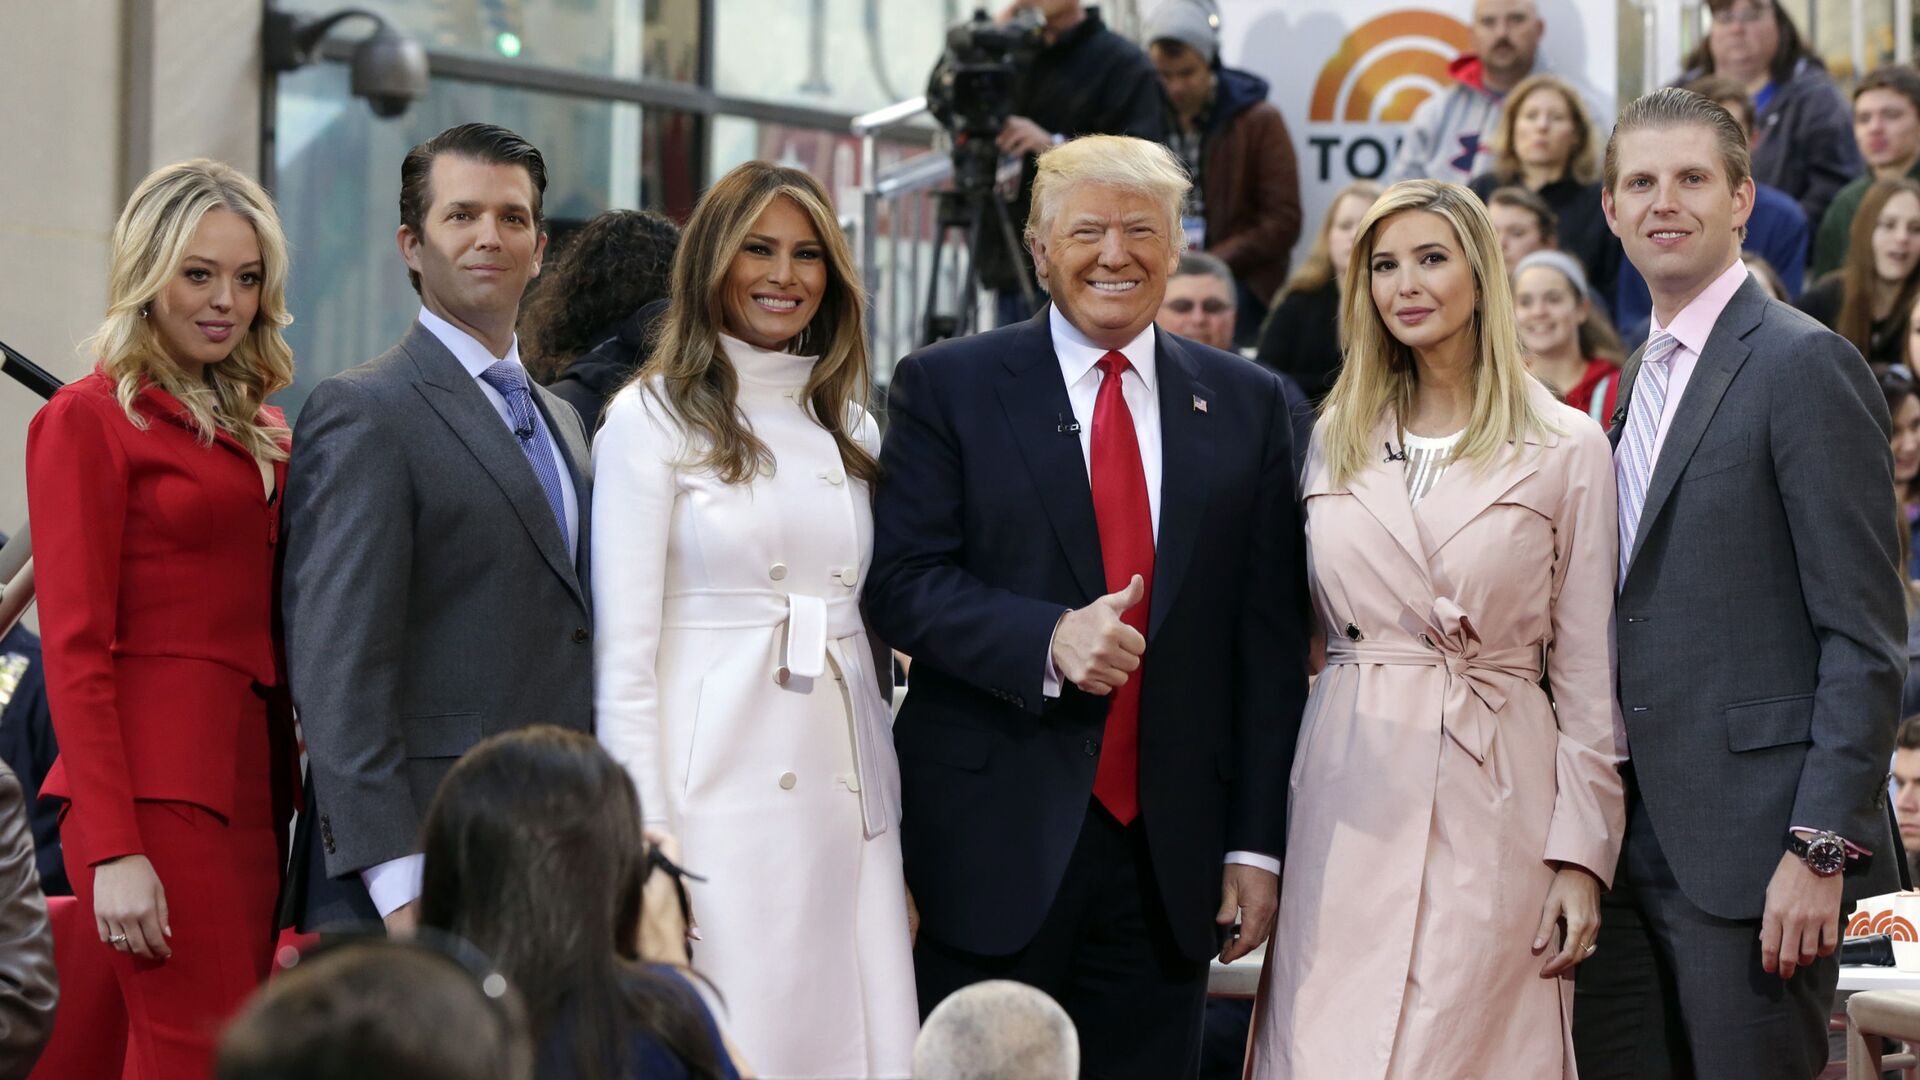 Republican presidential candidate Donald Trump, fourth from left, poses for a photo with family members on the NBC Today television program, in New York, Thursday, April 21, 2016. From left are: daughter Tiffany Trump, son Donald Trump Jr., his wife Melania Trump, daughter Ivanka Trump, and son Eric Trump. (AP Photo/Richard Drew) - Sputnik International, 1920, 04.10.2021